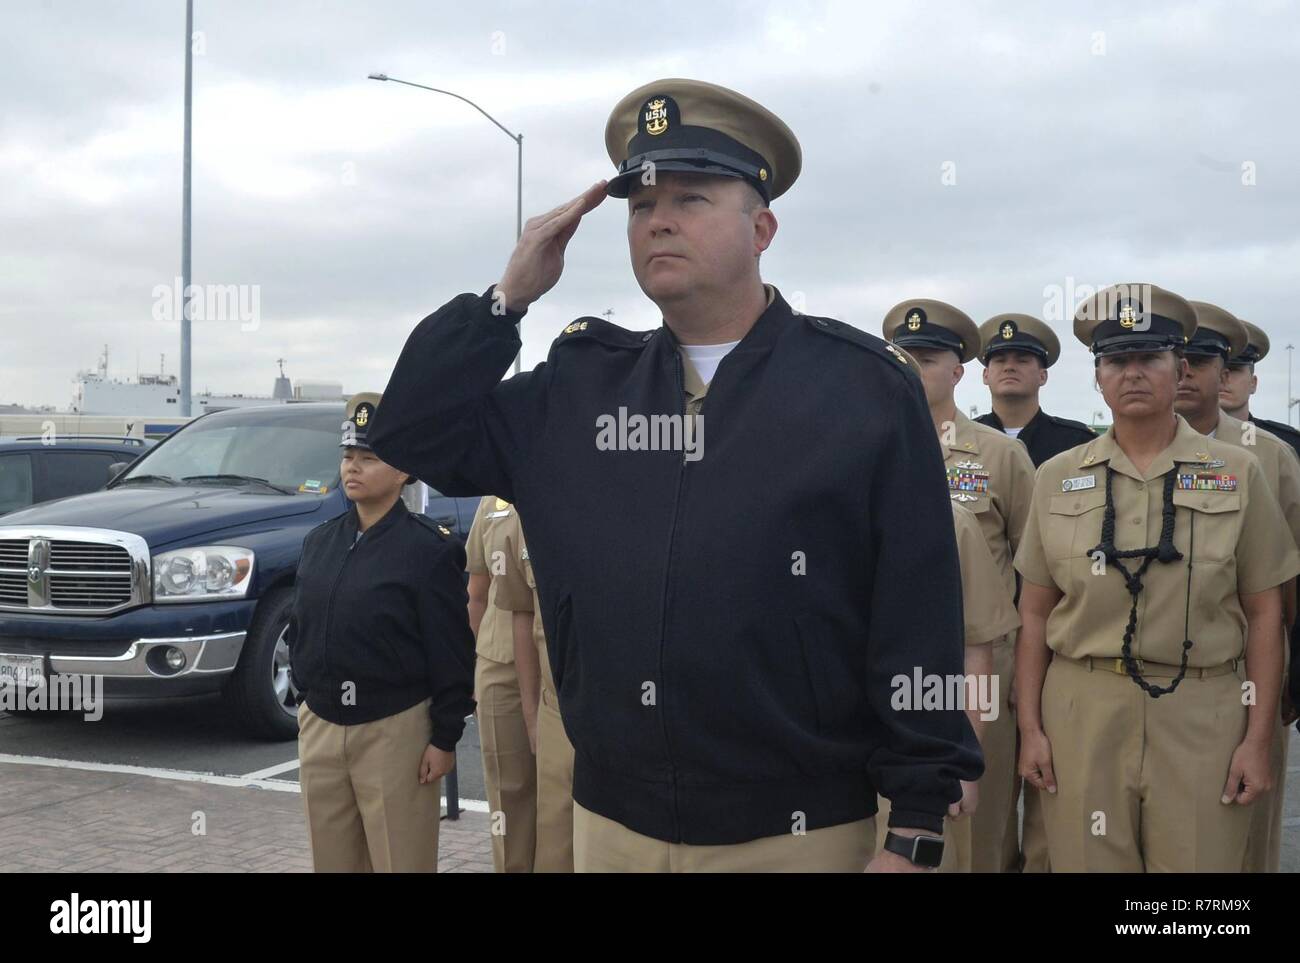 SAN DIEGO (April 3, 2017) Naval Base San Diego Command Master Chief Matt Ruane along with the Chief’s Mess observe morning colors in celebration of the 124th birthday of the chief petty officer rank. Stock Photo